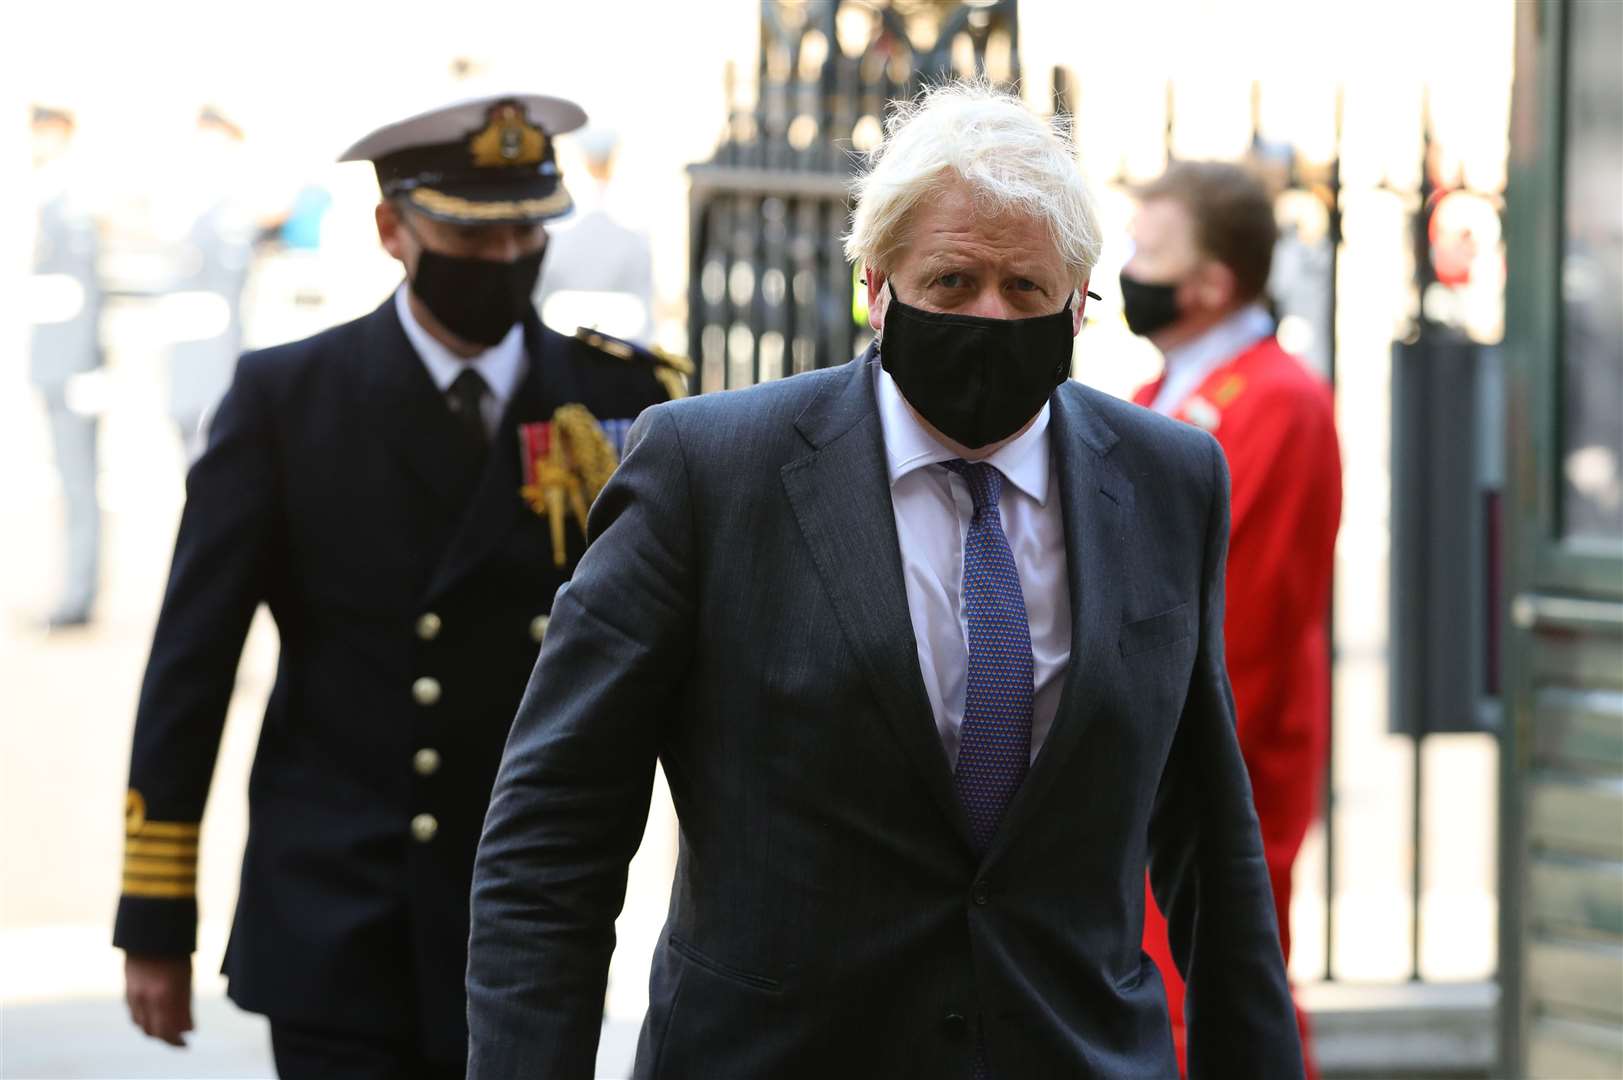 Prime Minister Boris Johnson arrives for the service (Aaron Chown/PA)